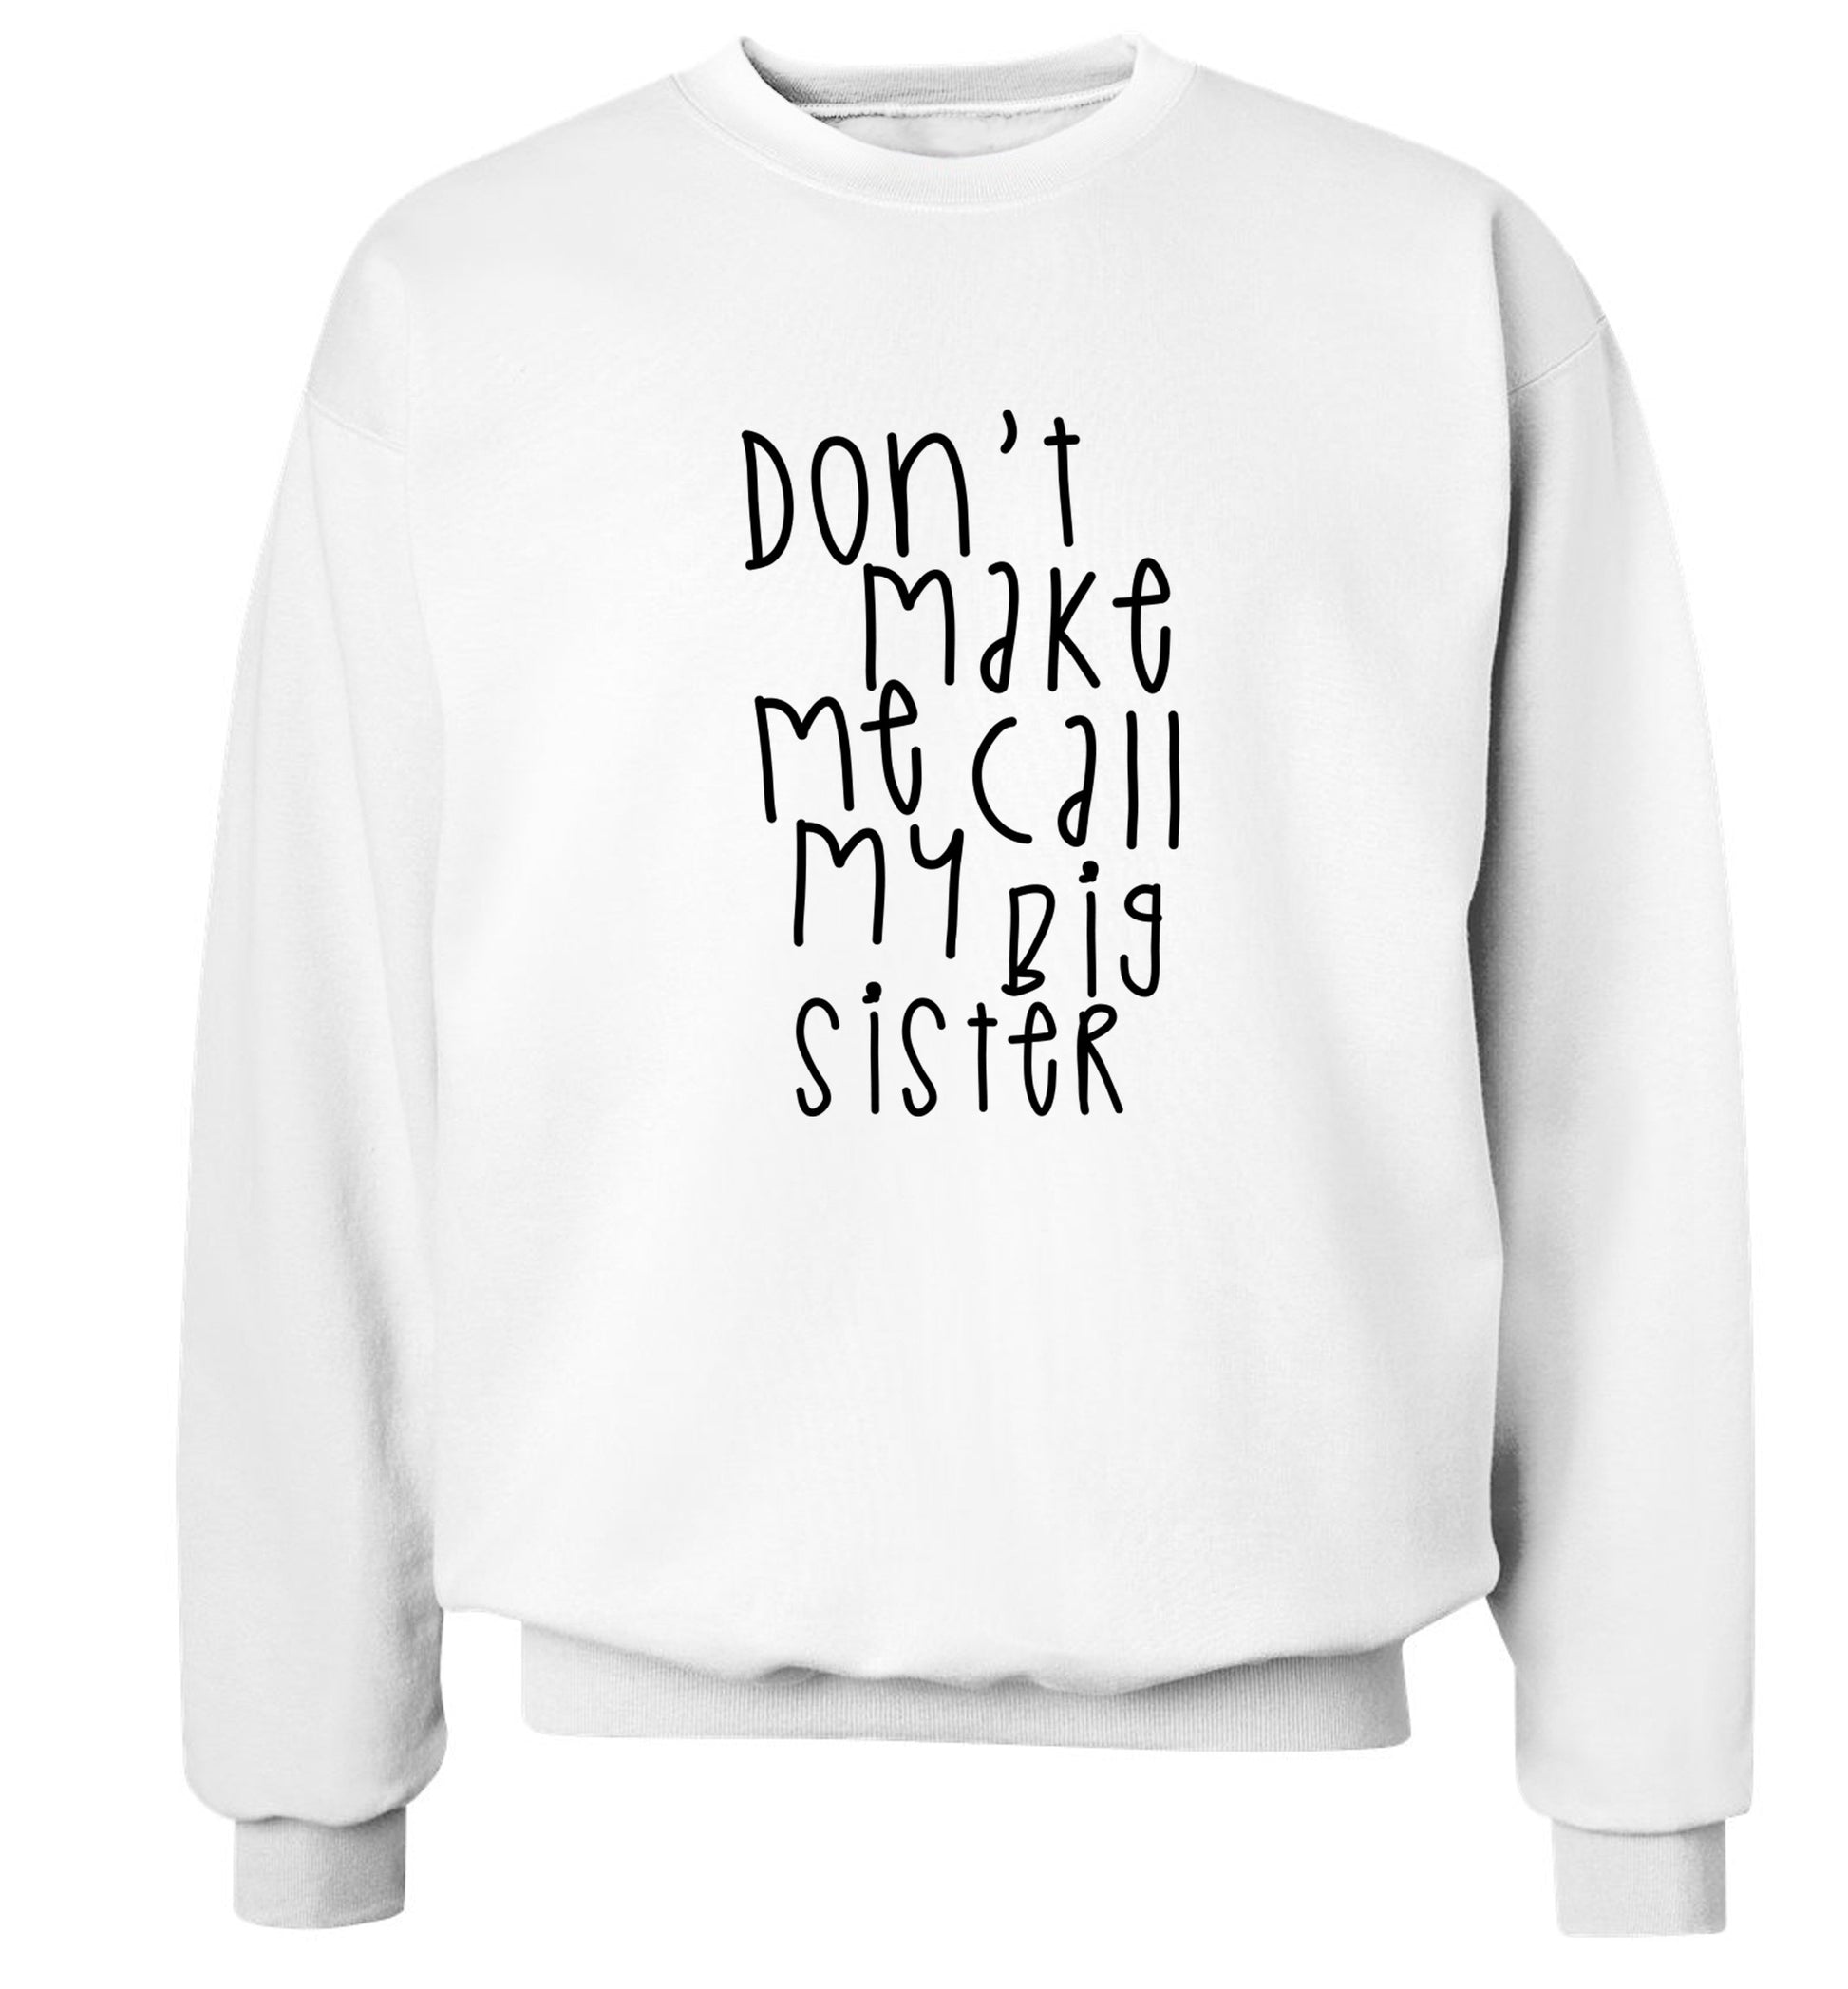 Don't make me call my big sister Adult's unisex white Sweater 2XL